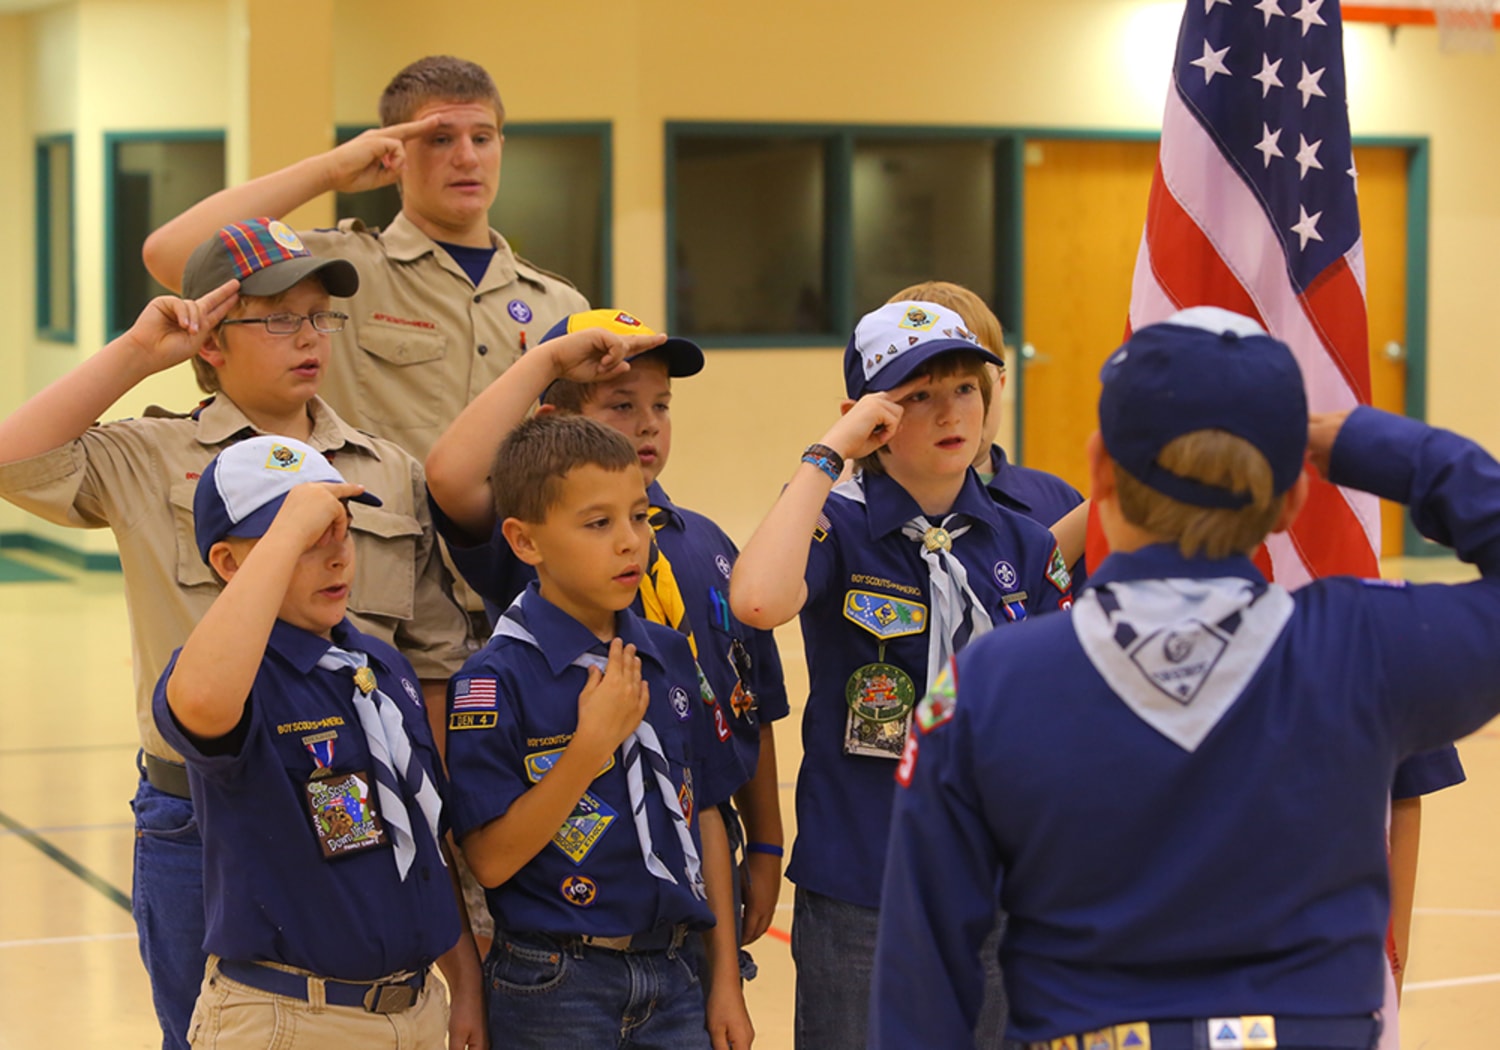 Boy Scouts membership drops 6% after gays allowed to join